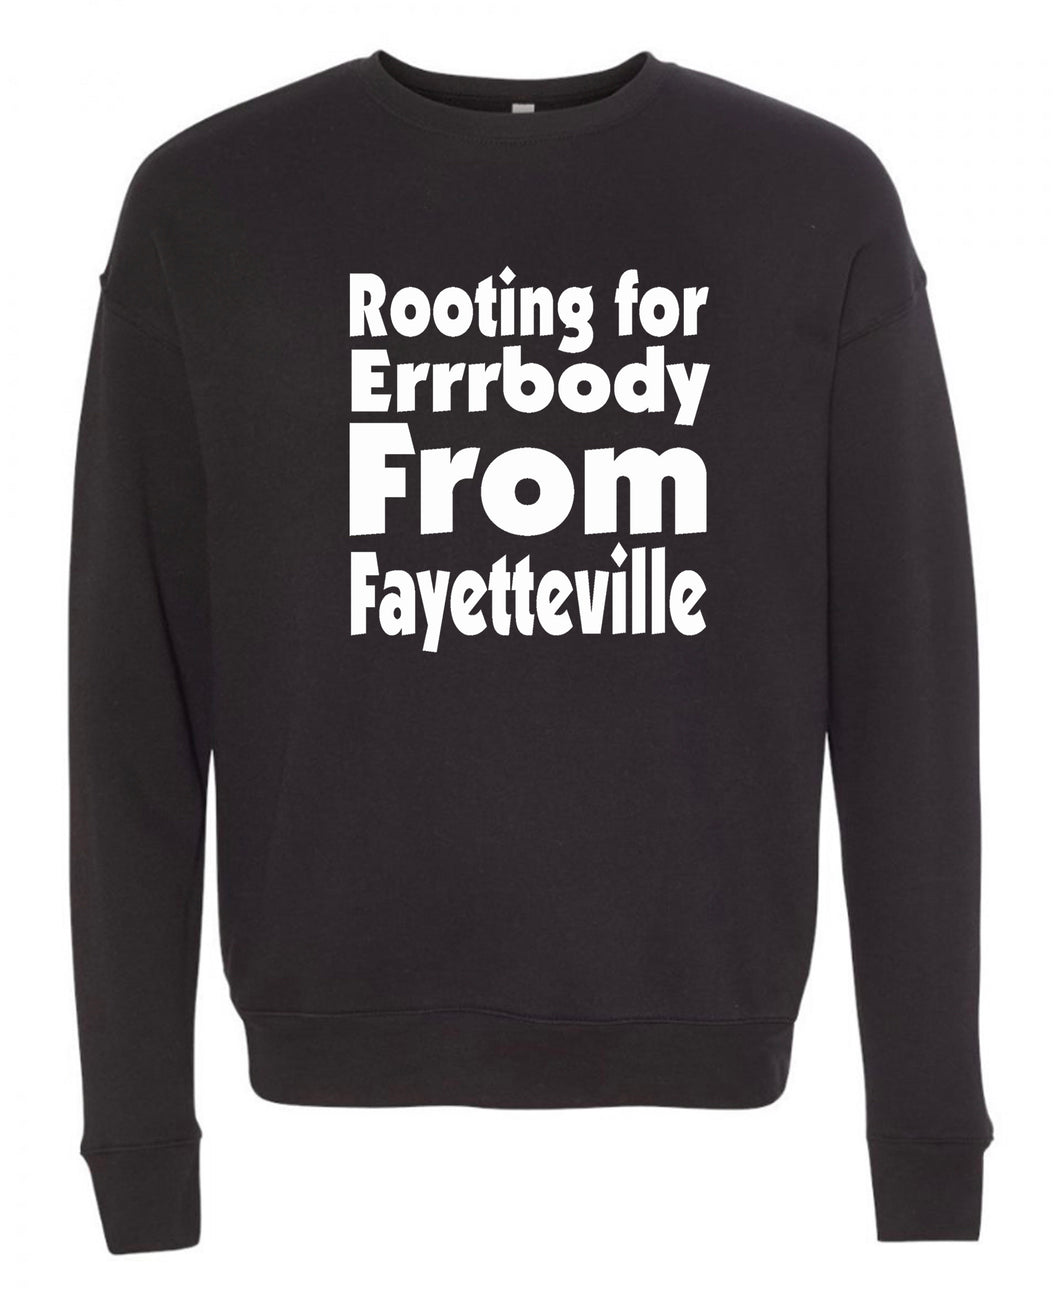 Rooting For Fayetteville Crewneck